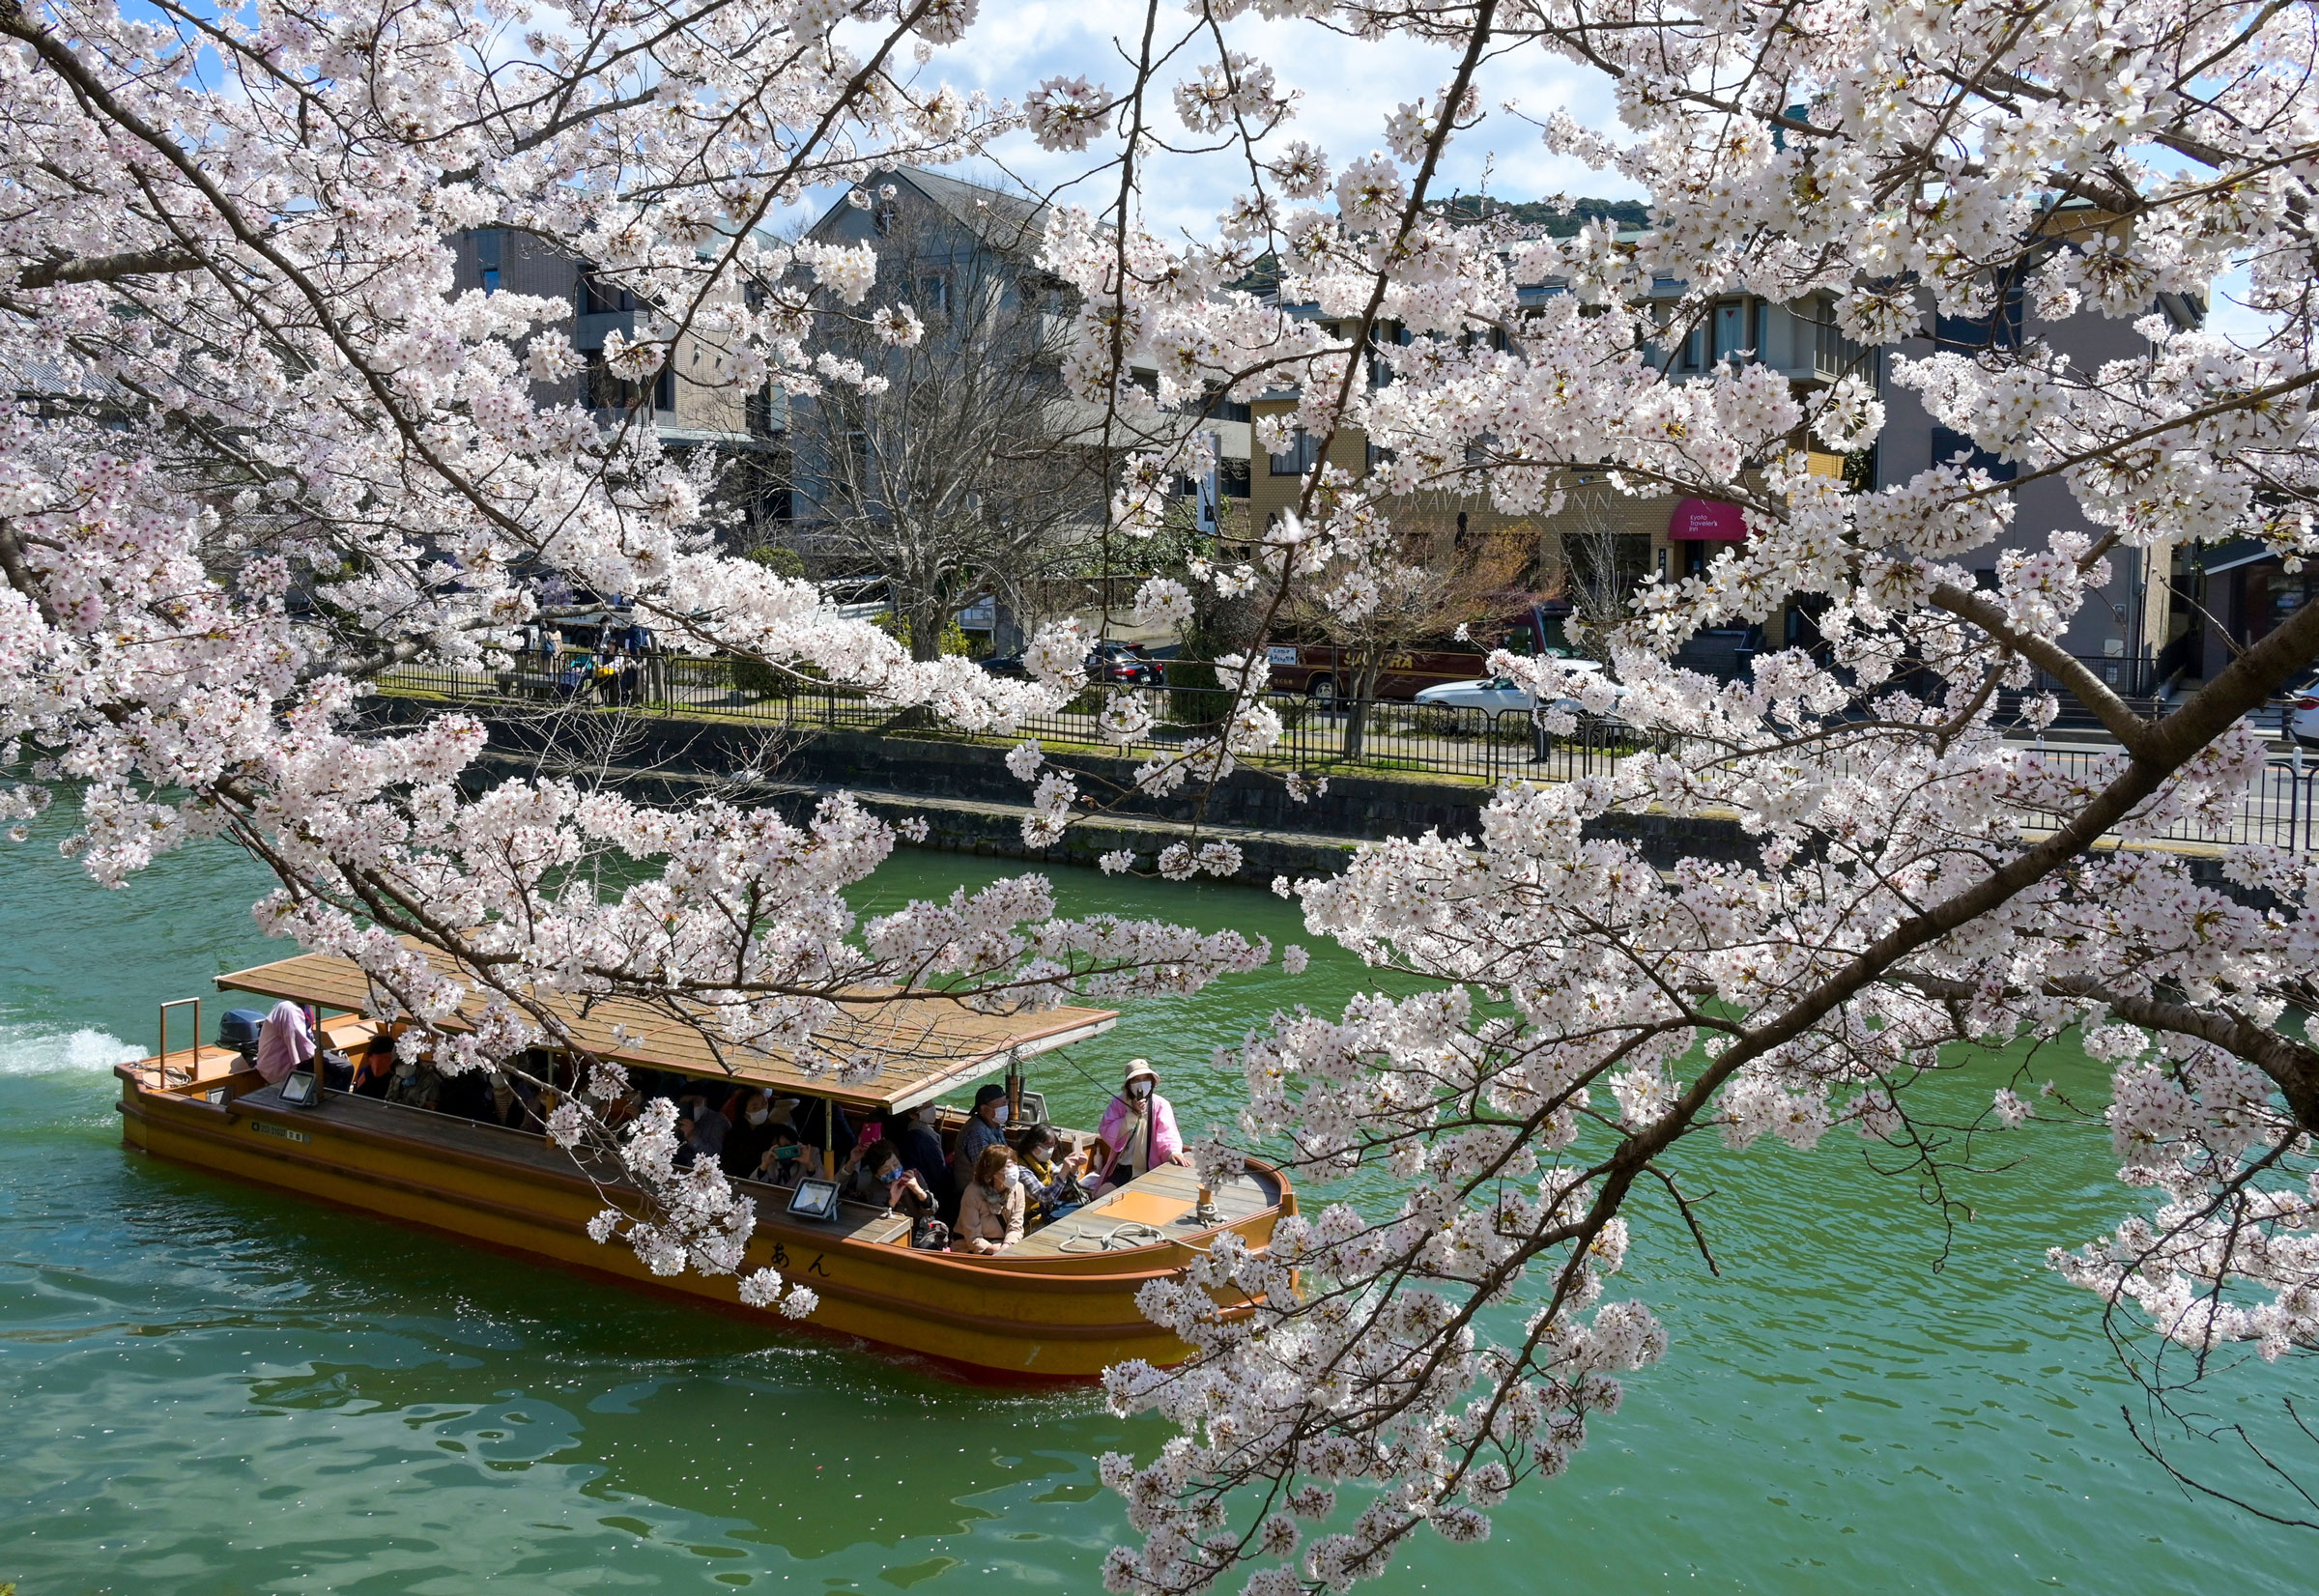 Cherry blossoms in full bloom at the Lake Biwa Canal in Kyoto City, Kyoto Prefecture. (The Yomiuri Shimbun/AP)